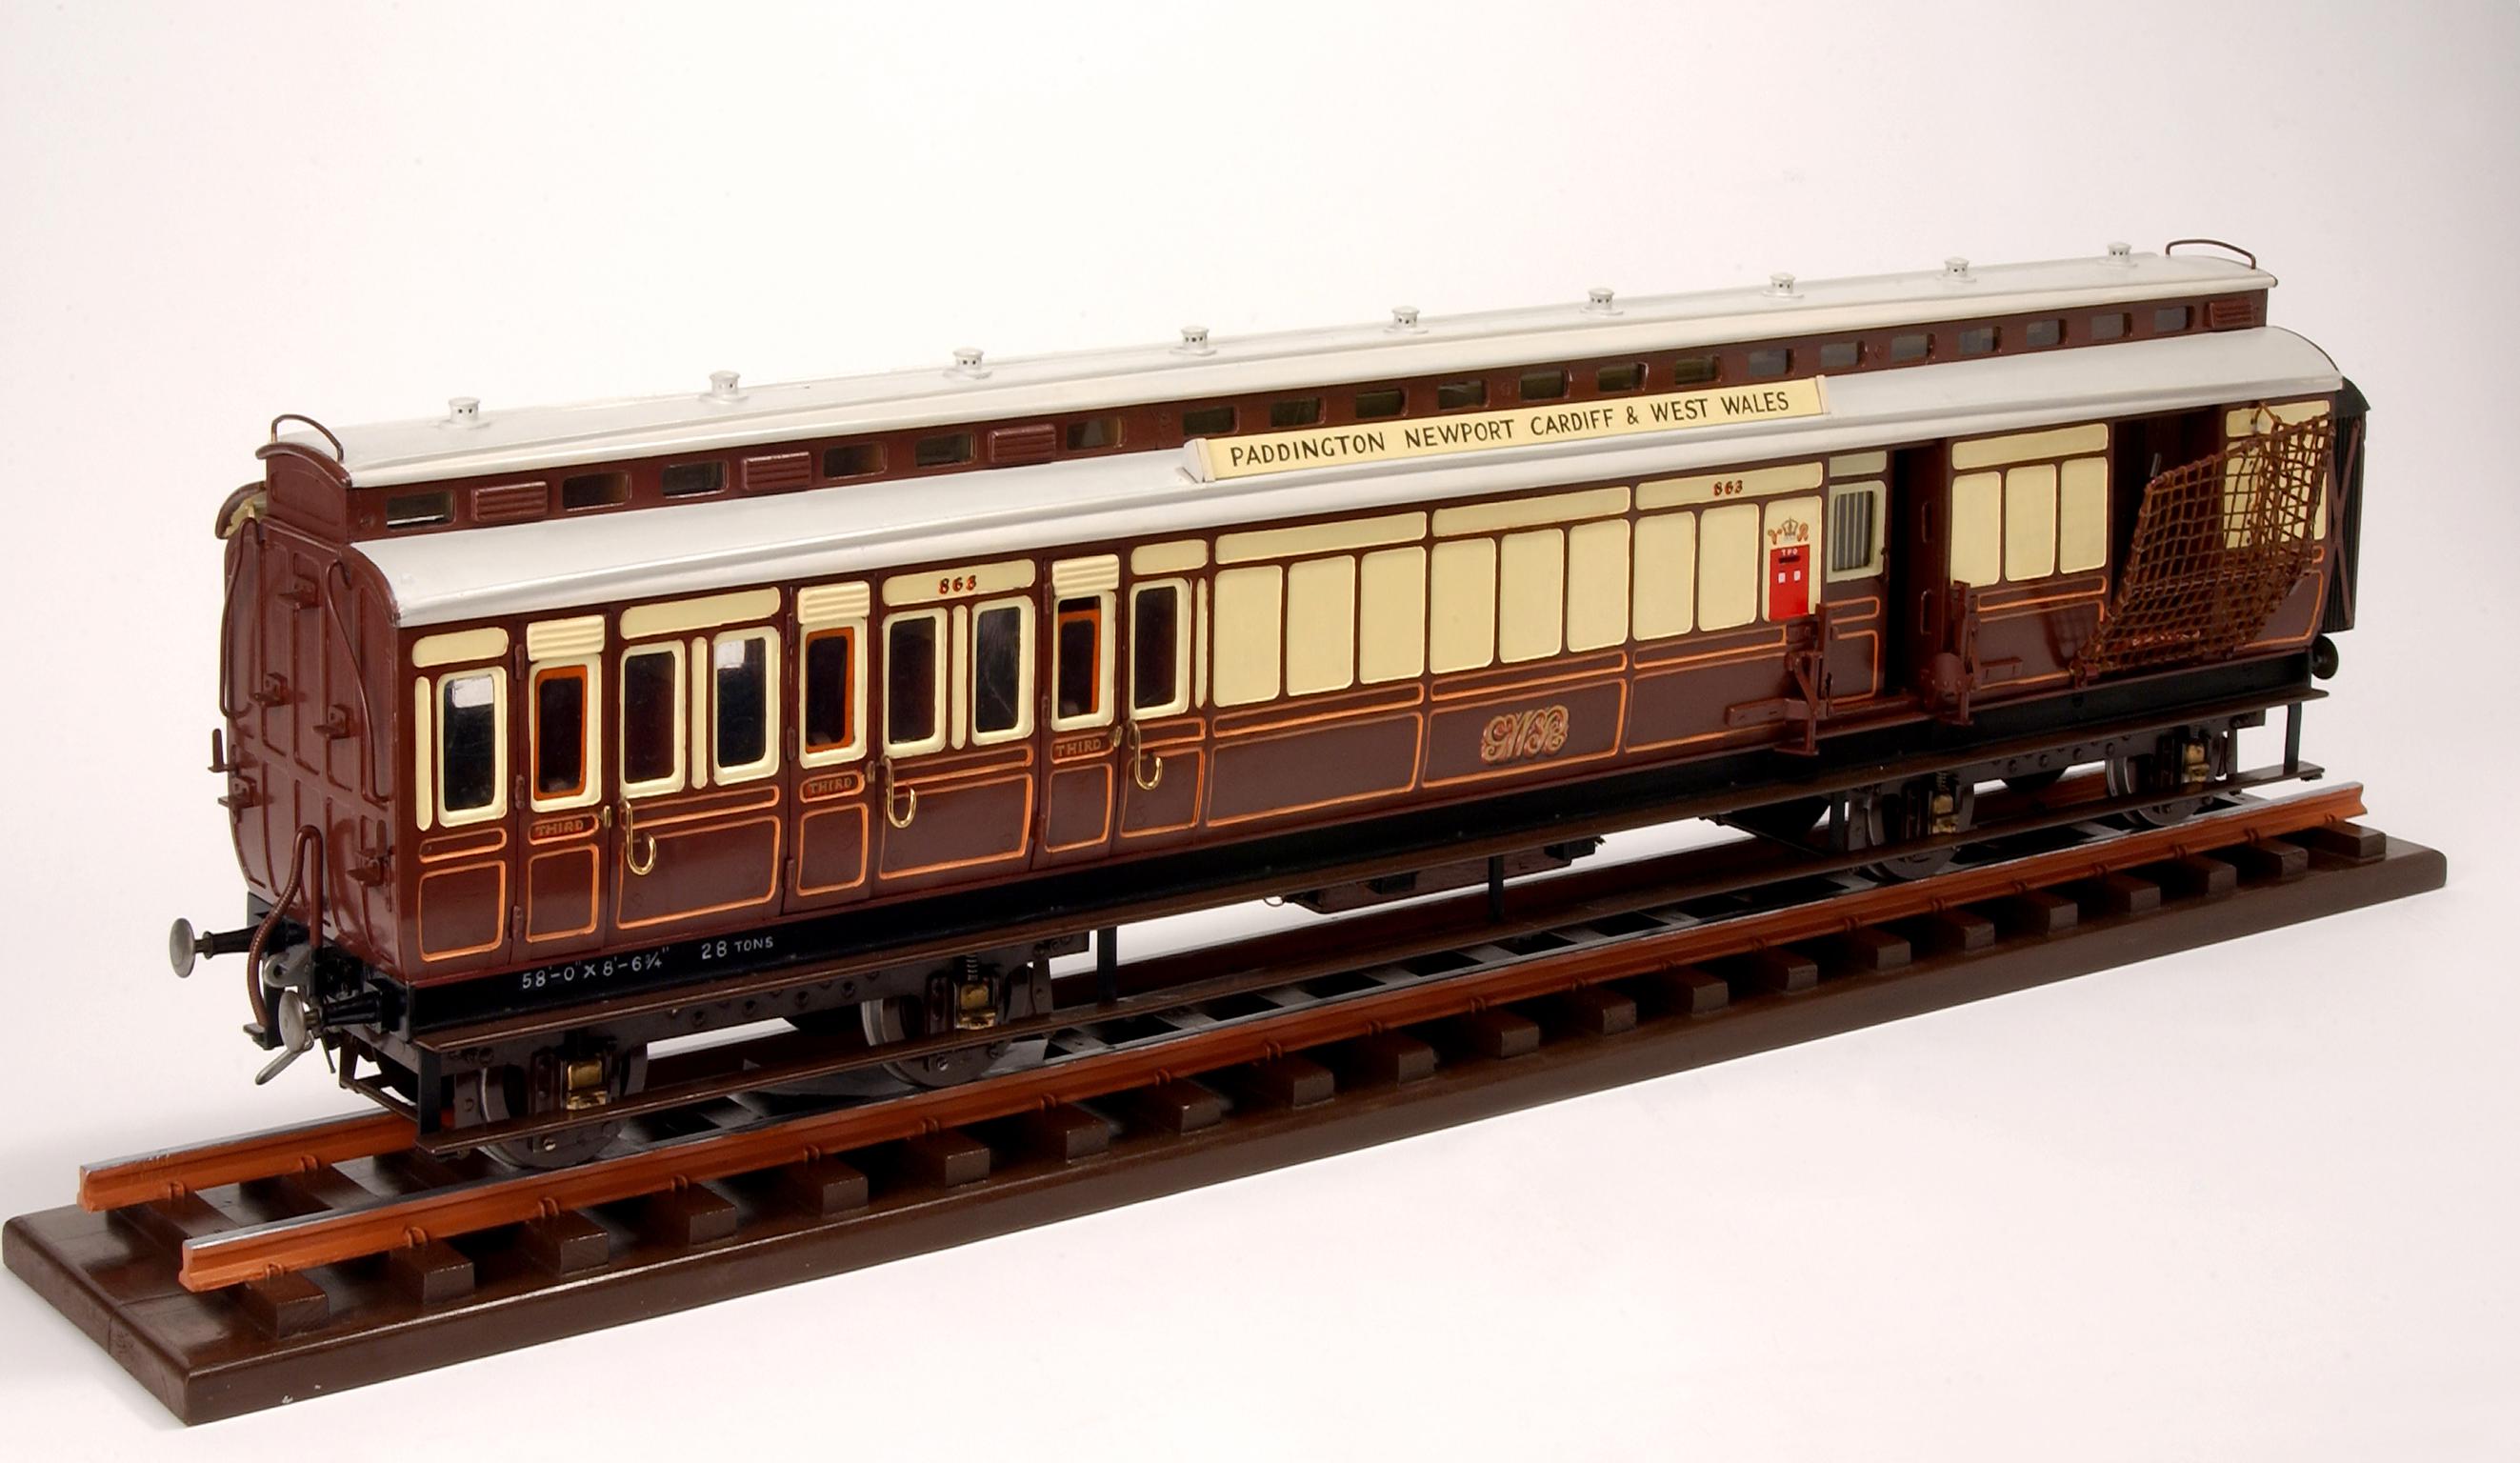 Travelling Post Office carriage model